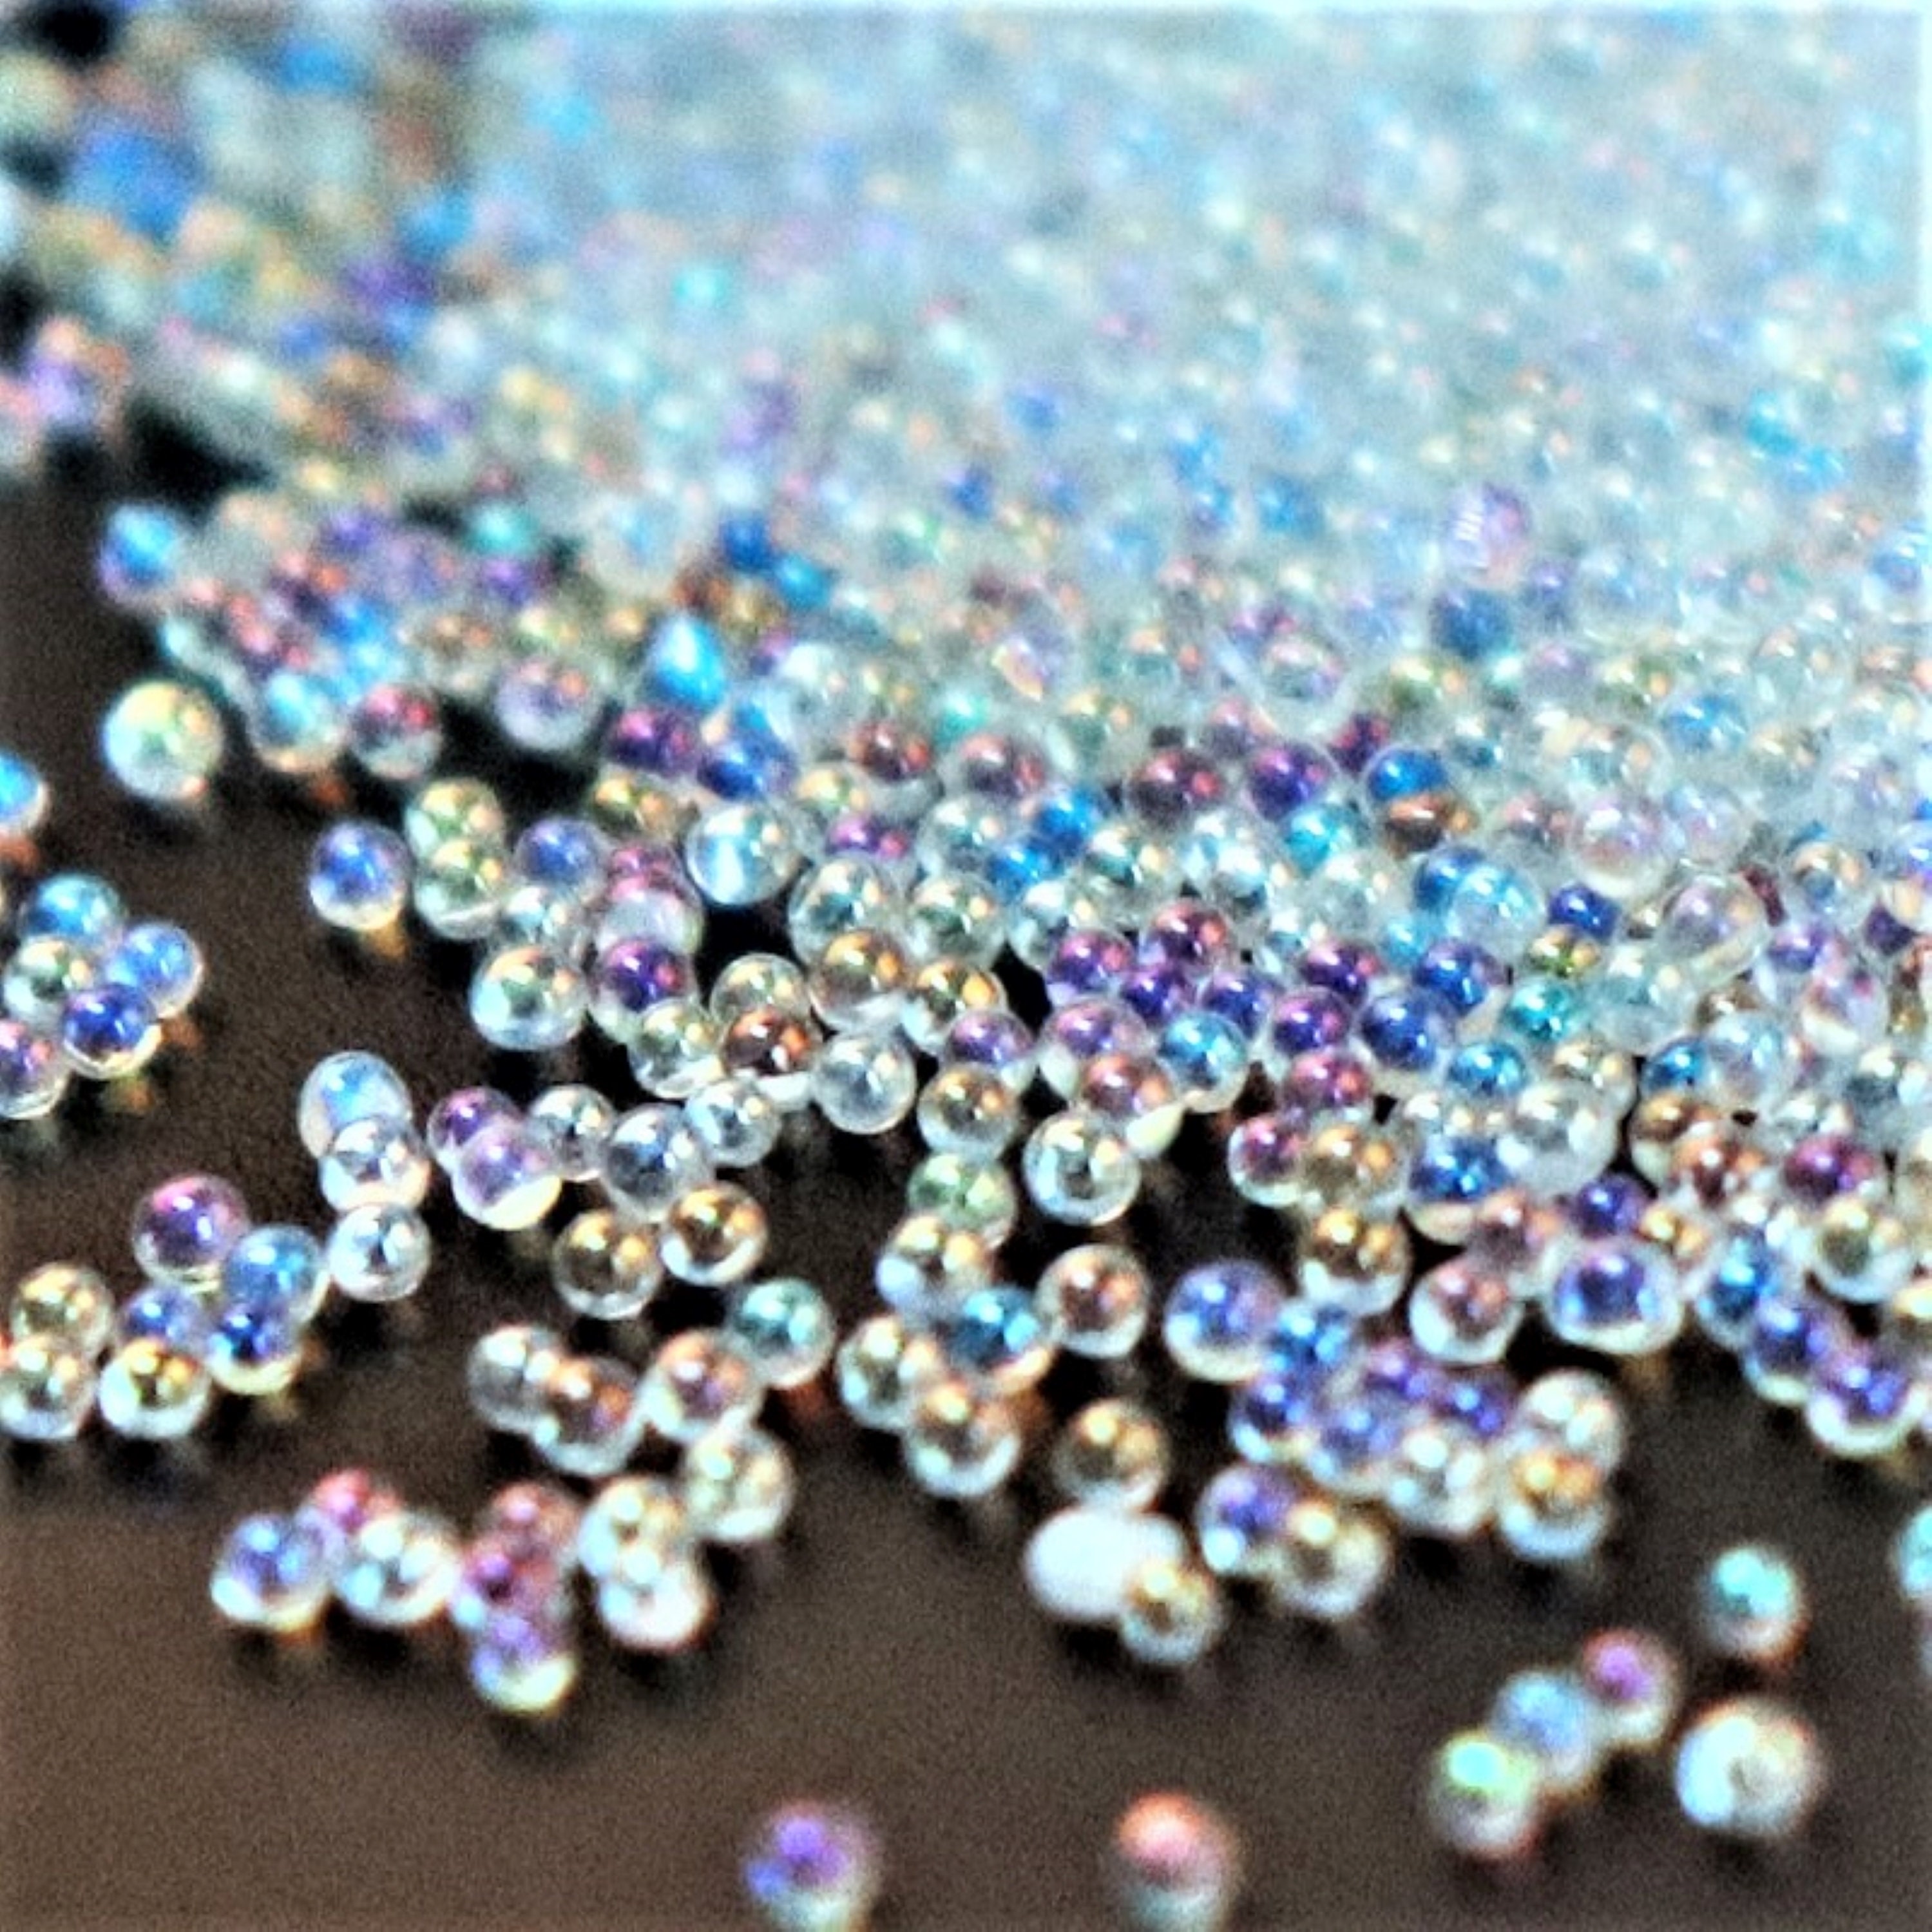 2boxes Colorful 3D Glitter Nail Art Decorations Mini Caviar Beads Crystal  Tiny Rhinestones Glass Micro Bead For Nails DIY